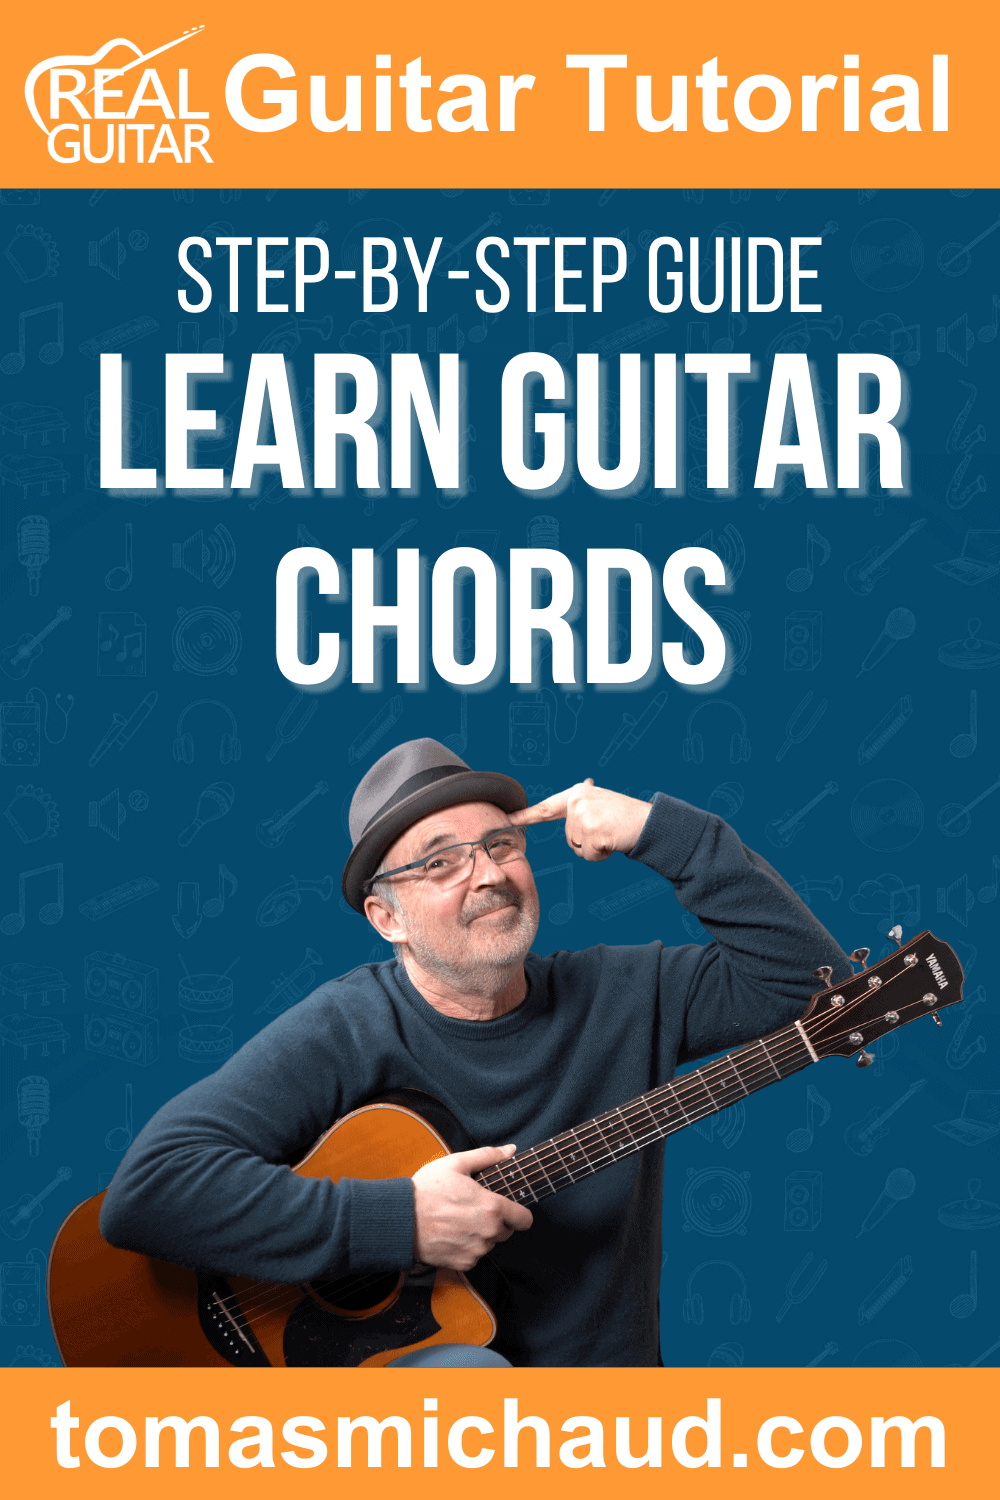 Step-By-Step Guide to Learn Guitar Chords